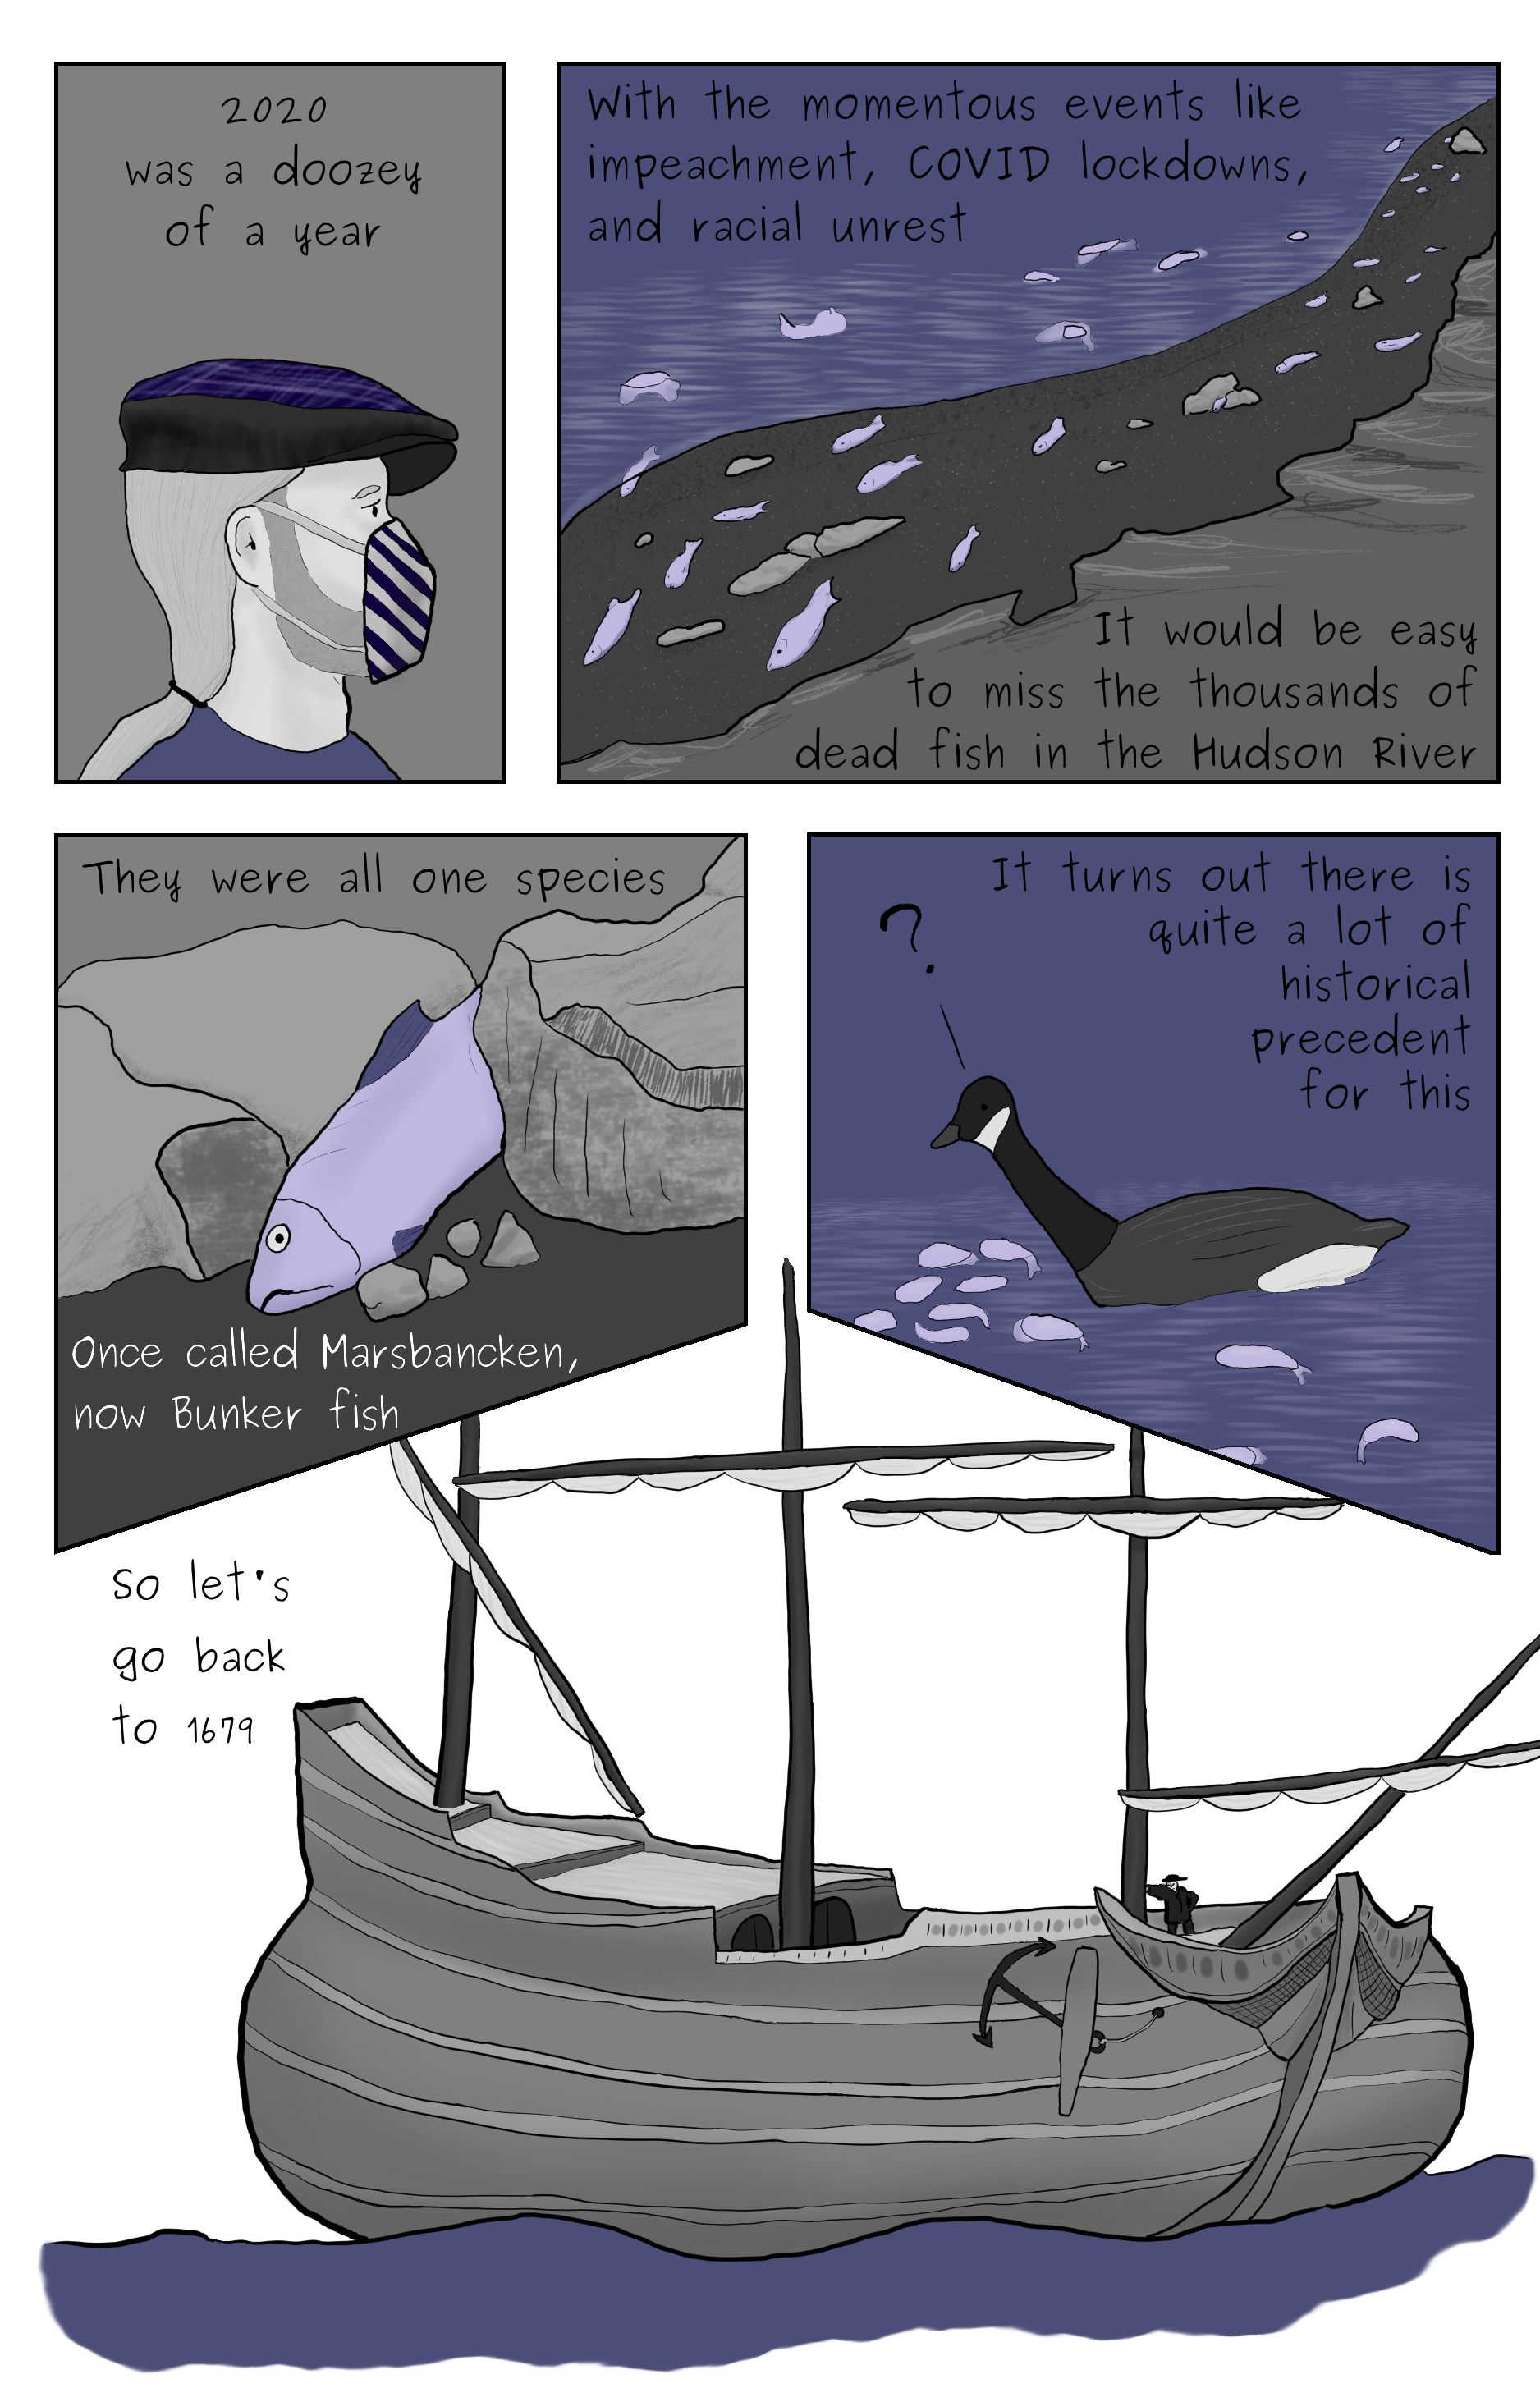 A comic featuring Phillip Gerba wearing a mask, a shore littered with dead fish, a dead bunker fish wedged between some rocks, a Canada goose swimmng through a bunch of dead fish, and a flyute with Jasper Danckaerts on the deck.